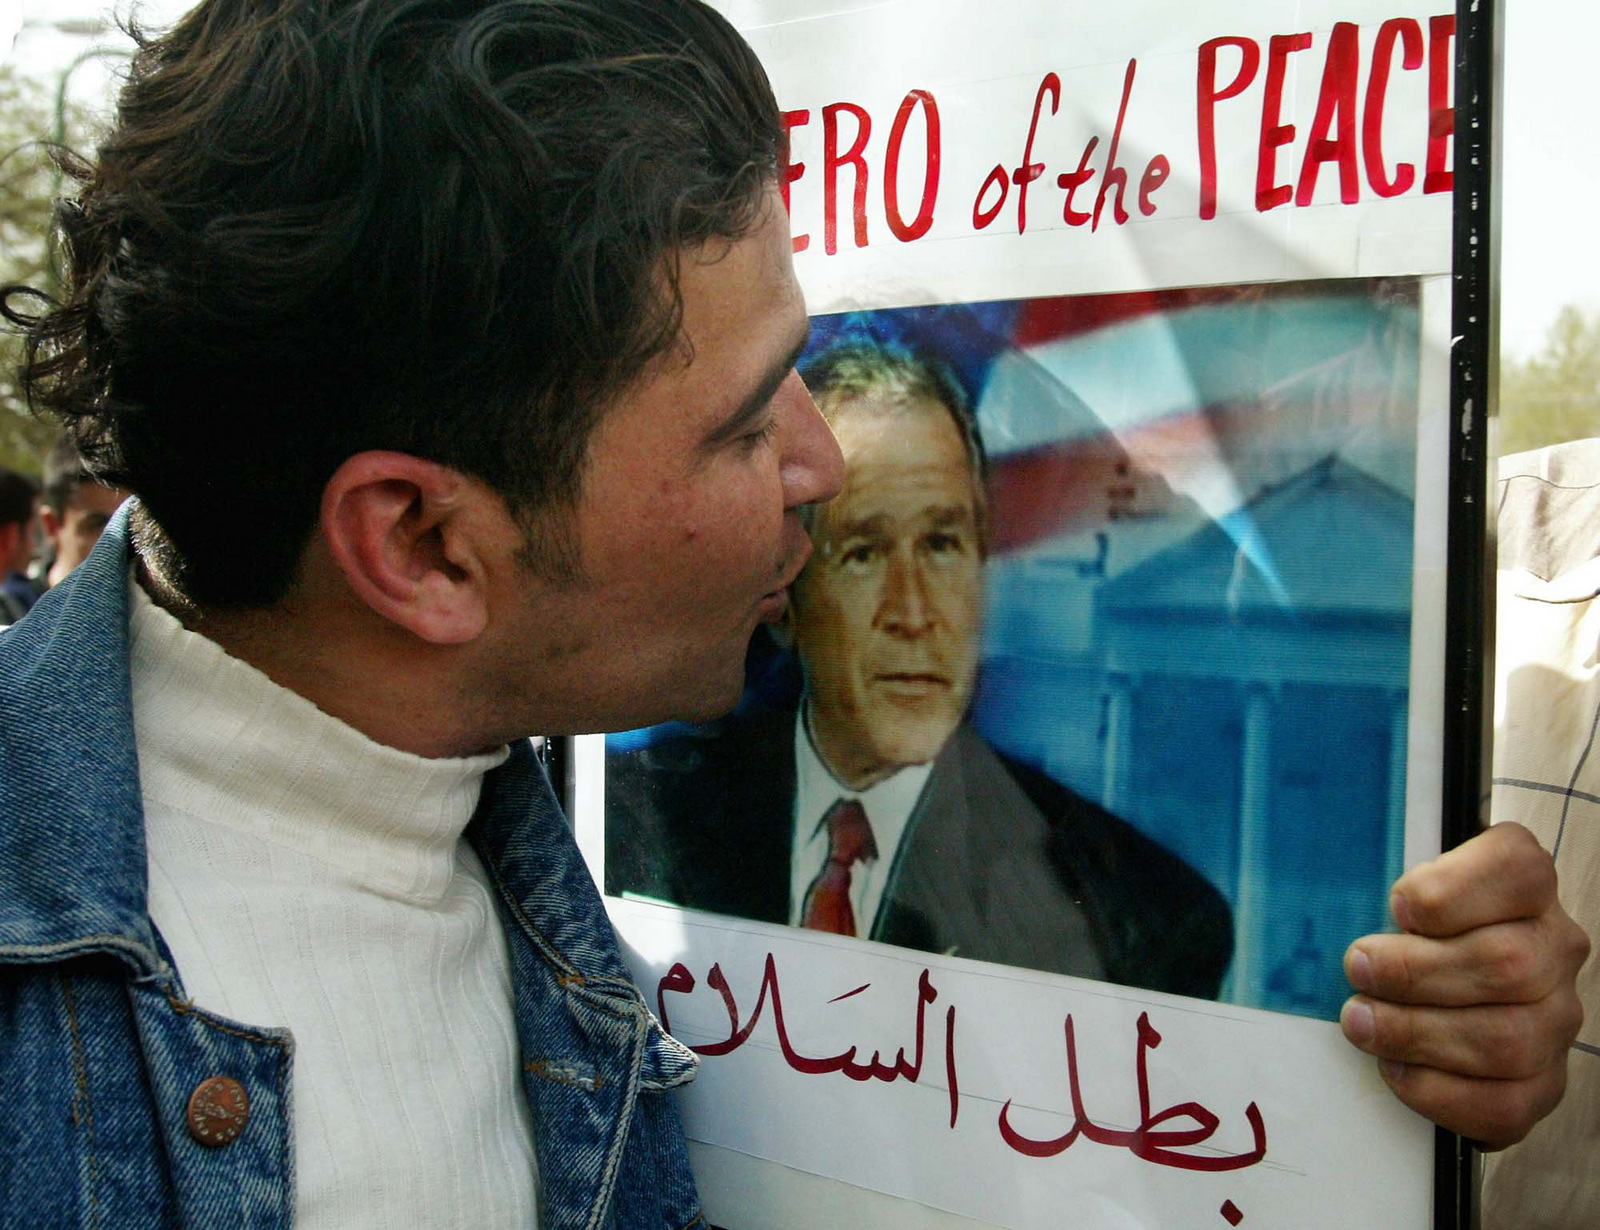 A Kurd kisses a picture of United States President George W. Bush during celebrations in the streets of Sulaymaniyah, northern Iraq Wednesday April 9, 2003. (AP/Kevin Frayer)